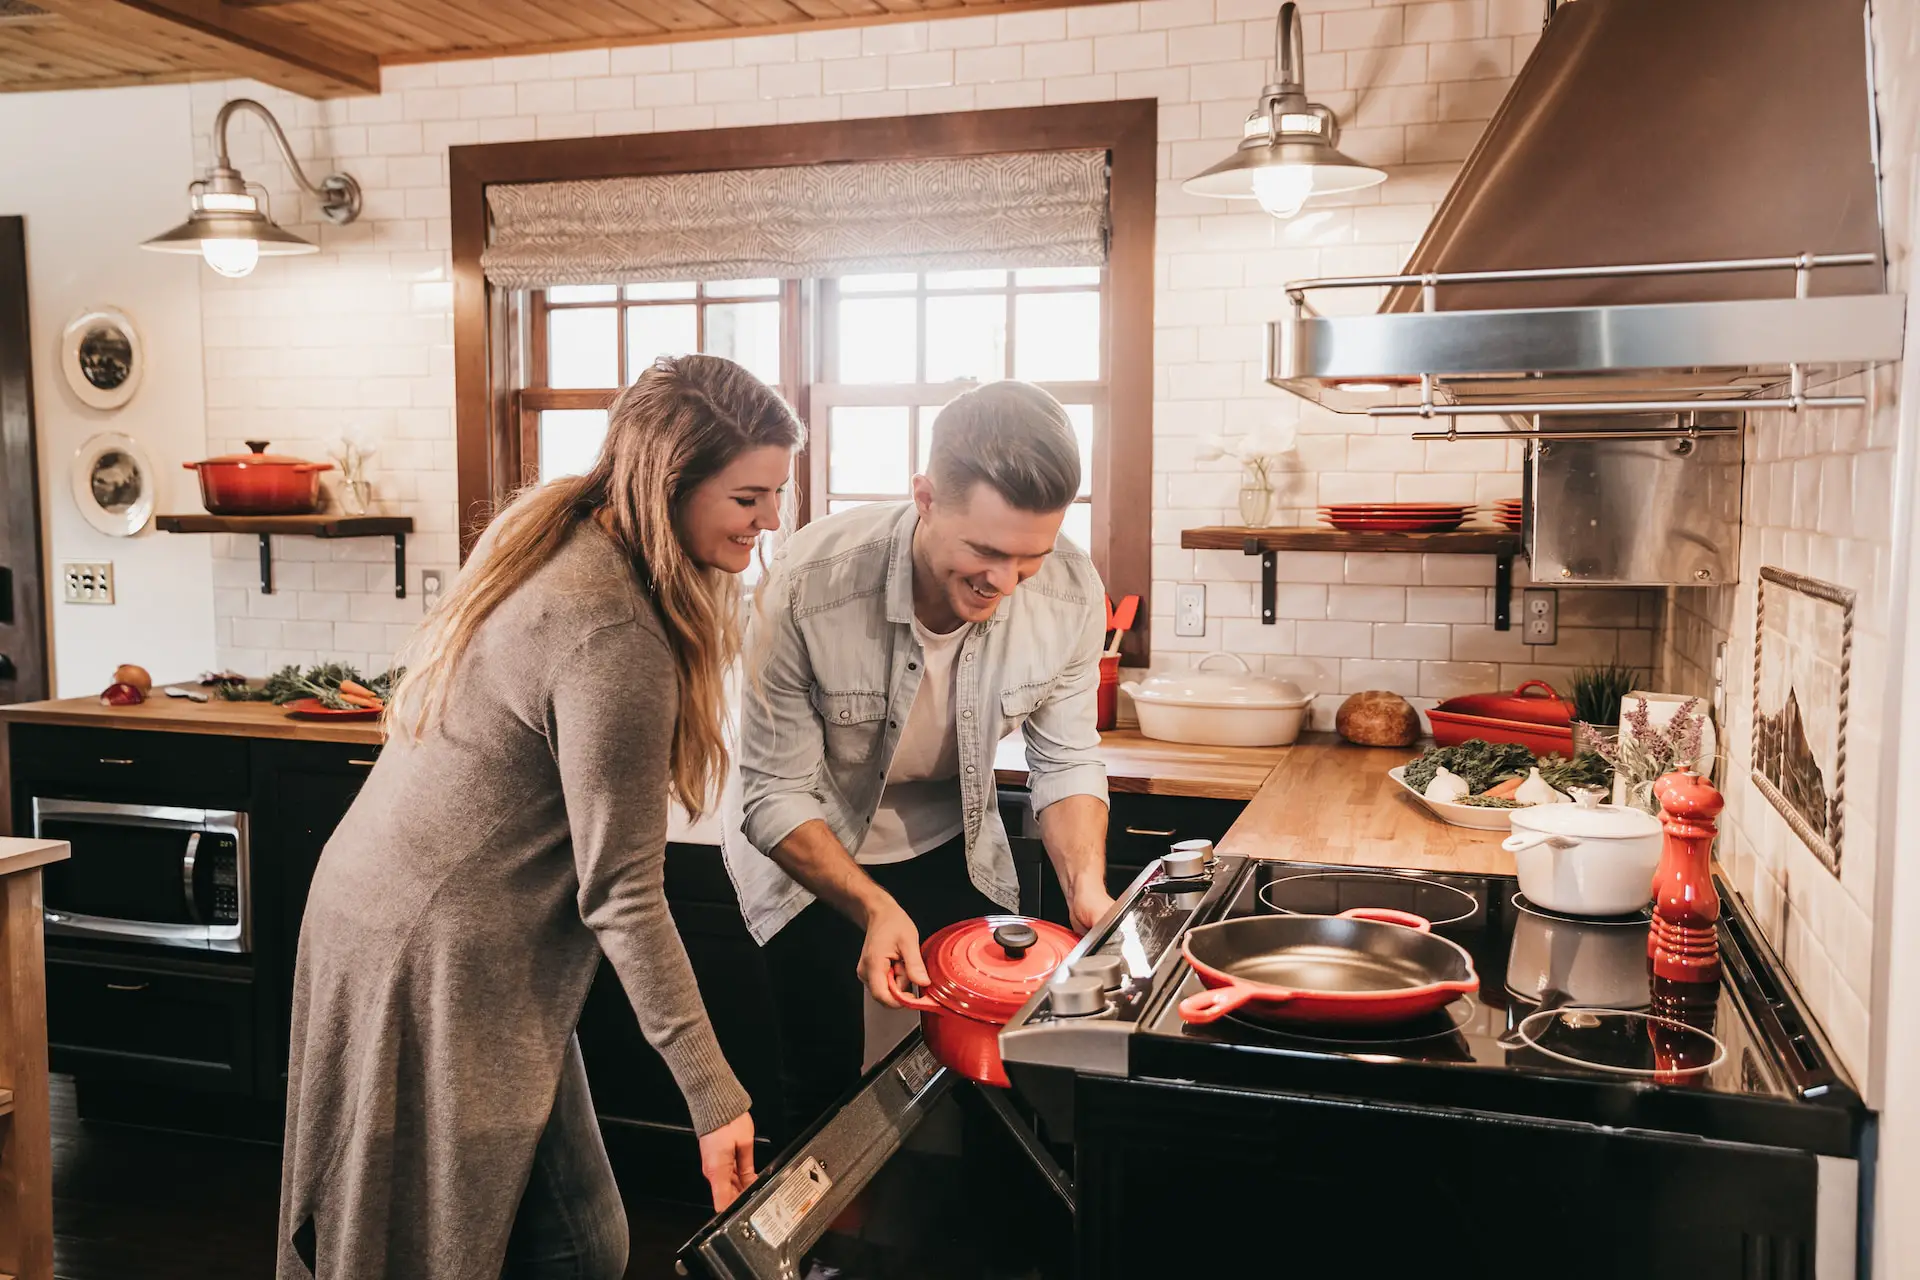 Home Appliance Protection: Driving Sales through Effective Marketing Campaigns